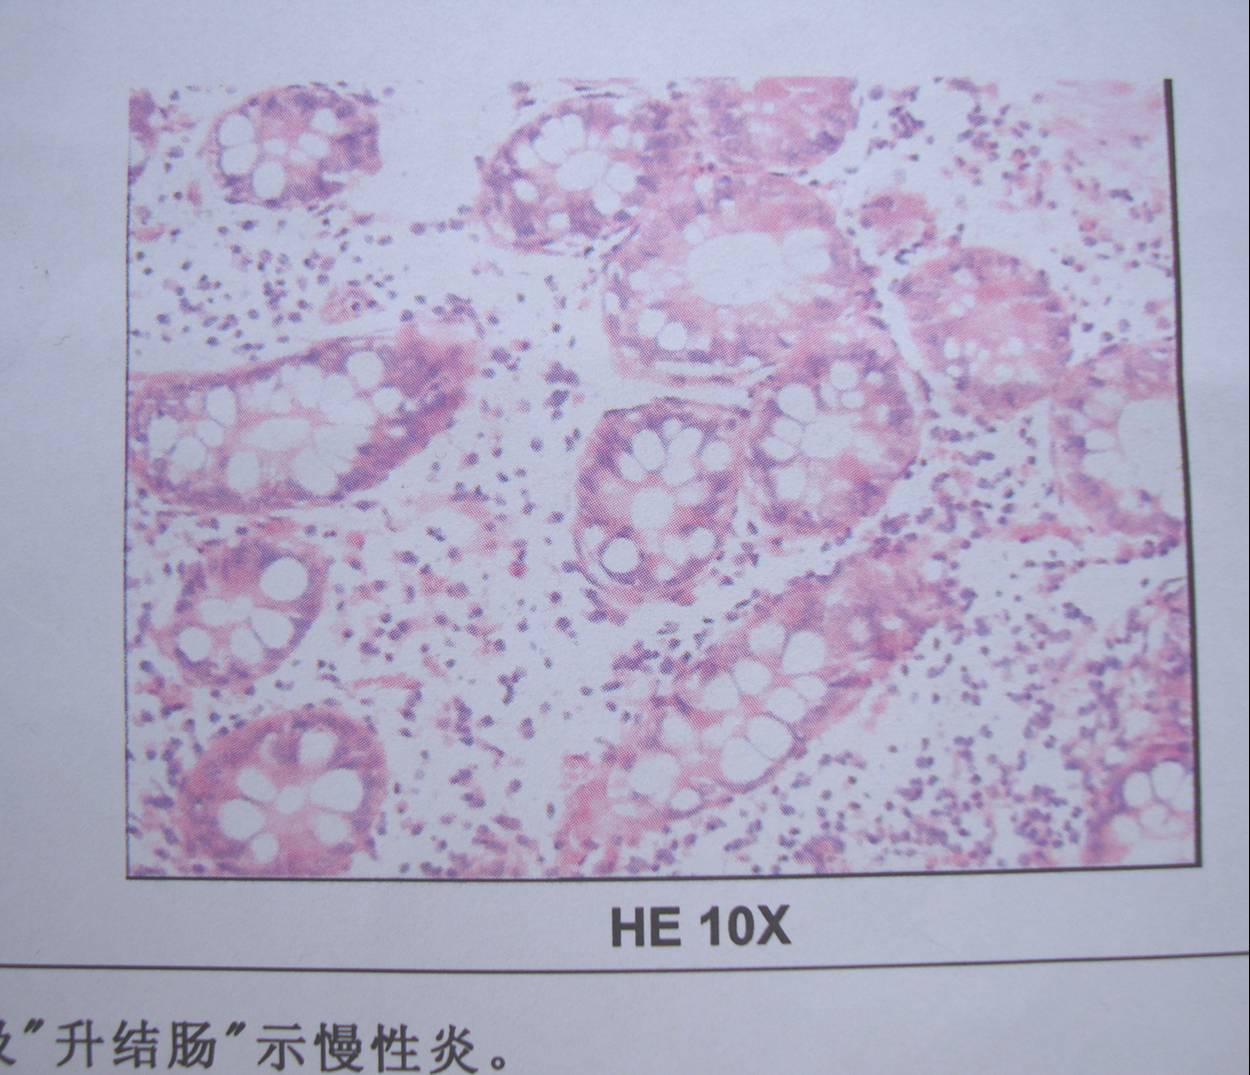 Picture:  A microscopic view of the insides of the man in China. No sign of anything amiss, apparently.  Wuxi, China